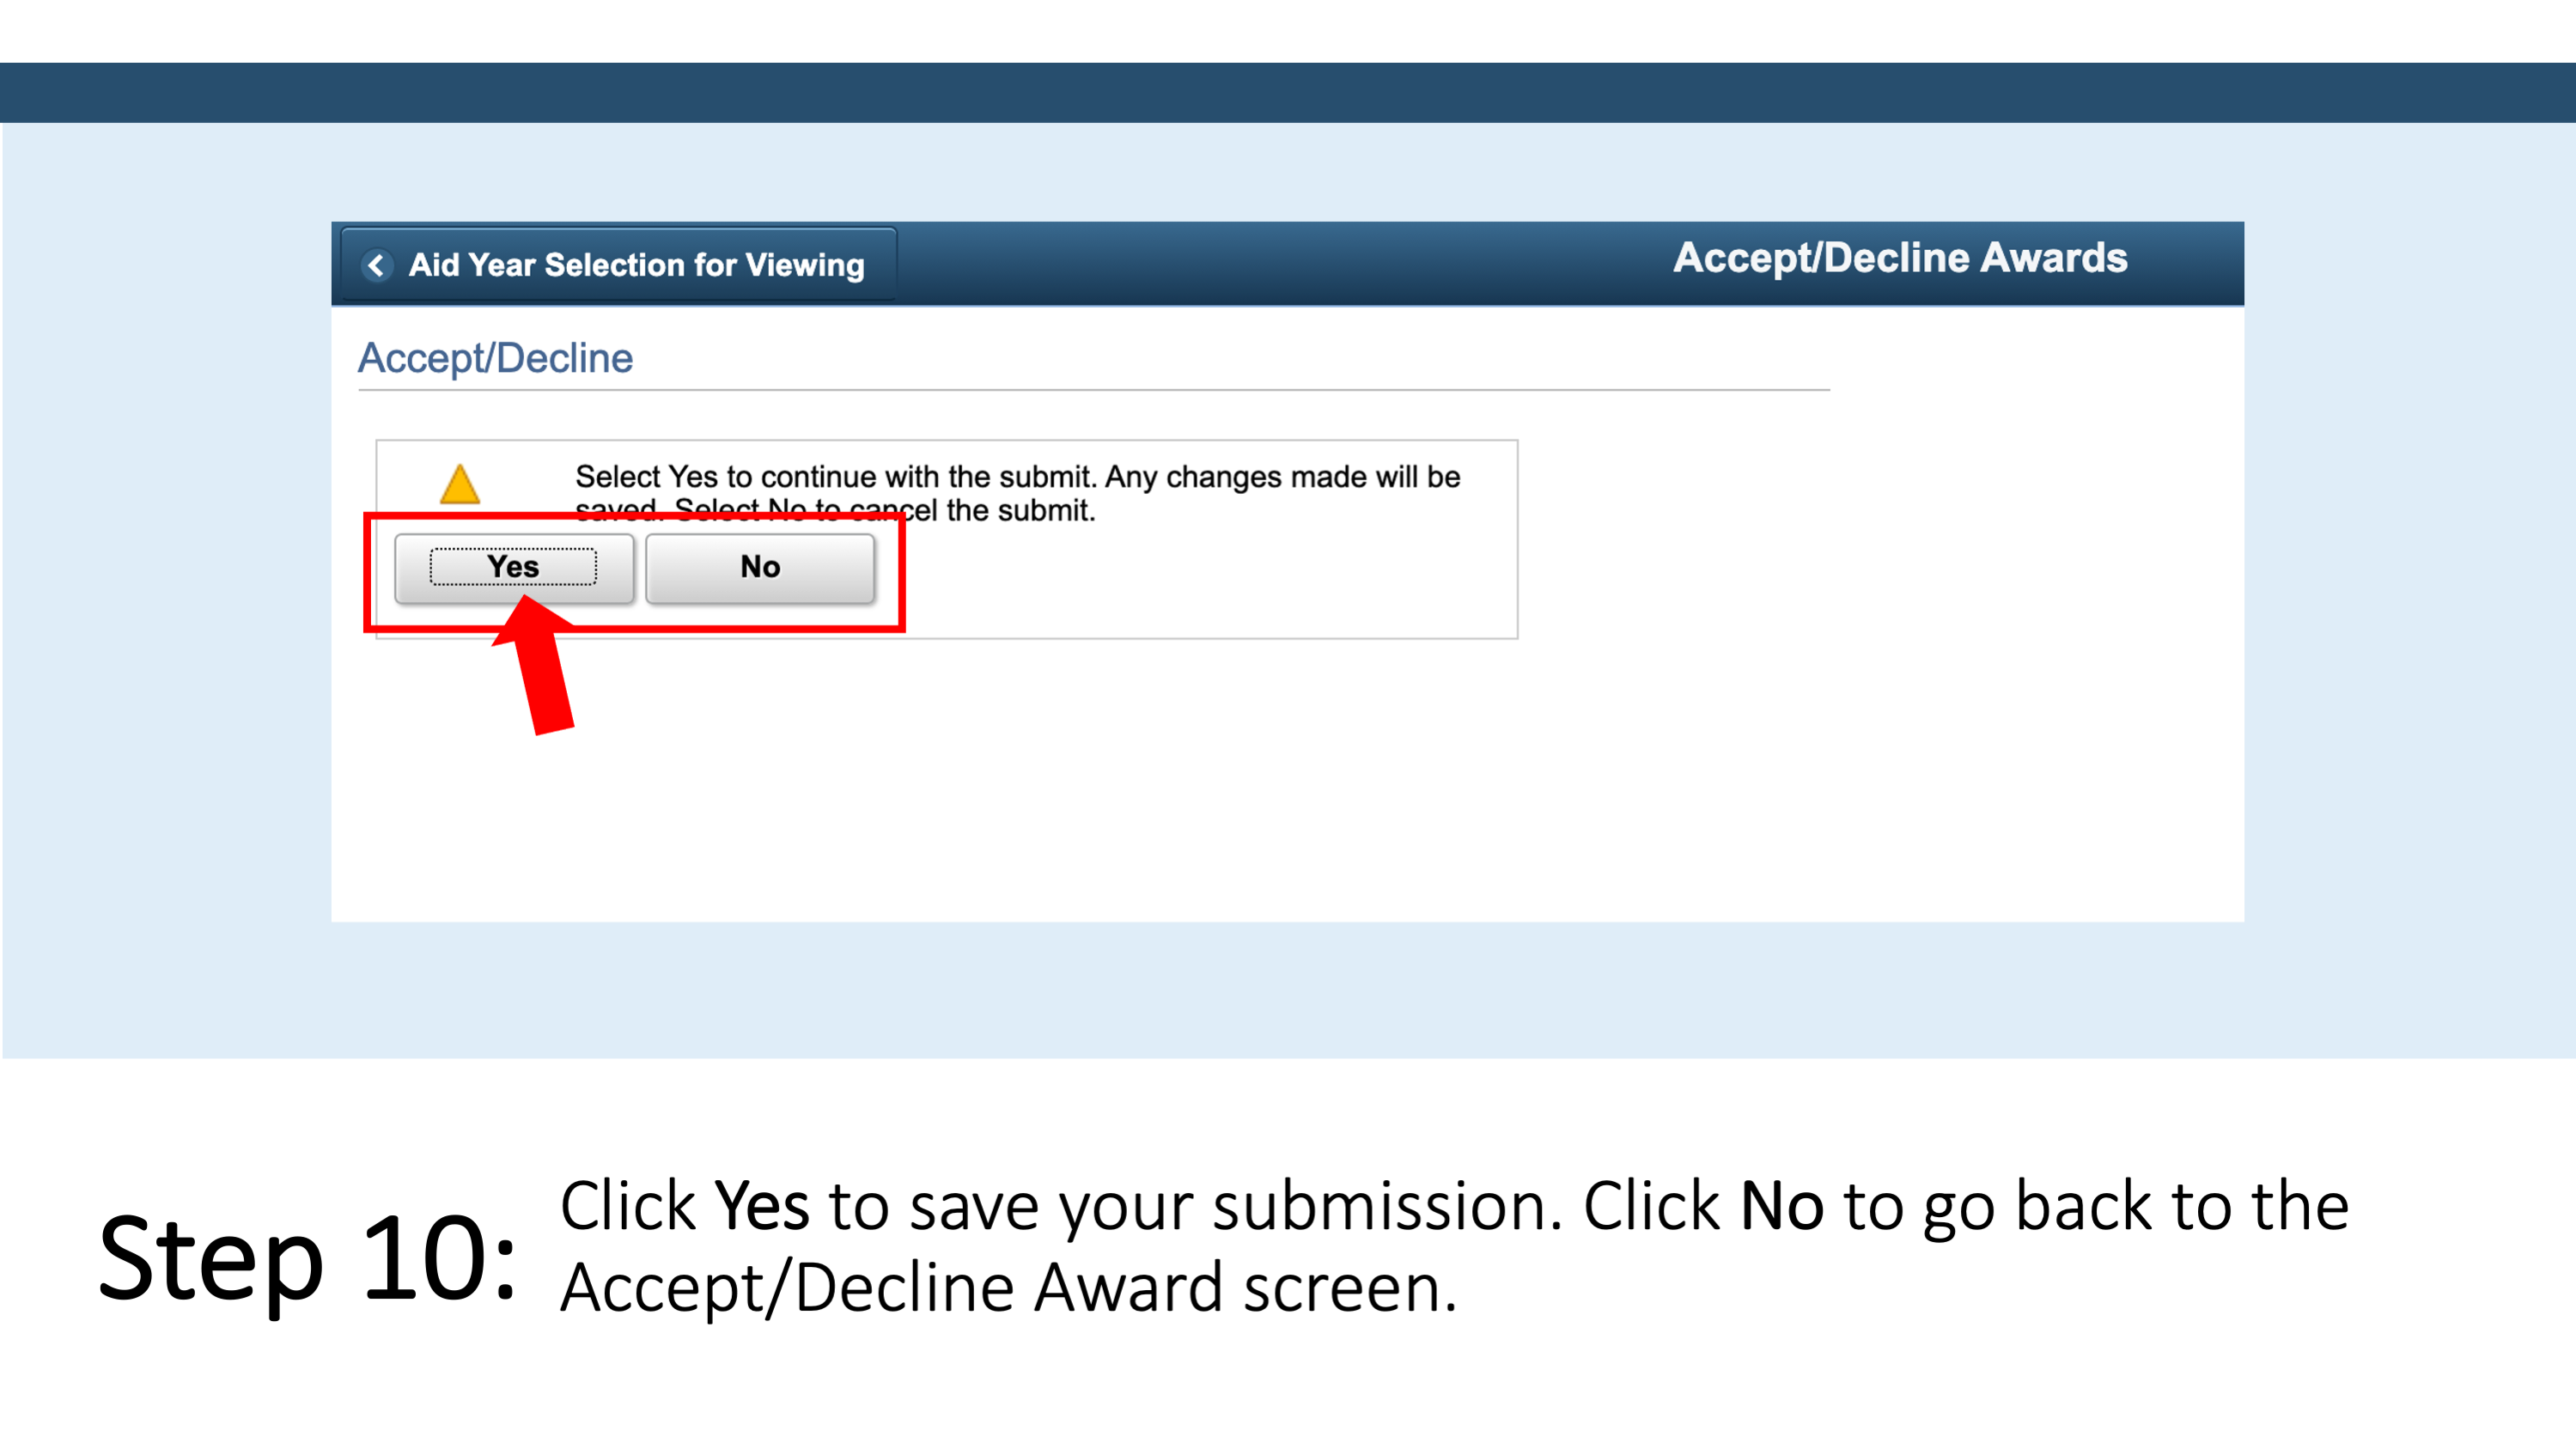 Step 10: Click Yes to save your submission. Click No to go back to the Accept/Decline Award screen.